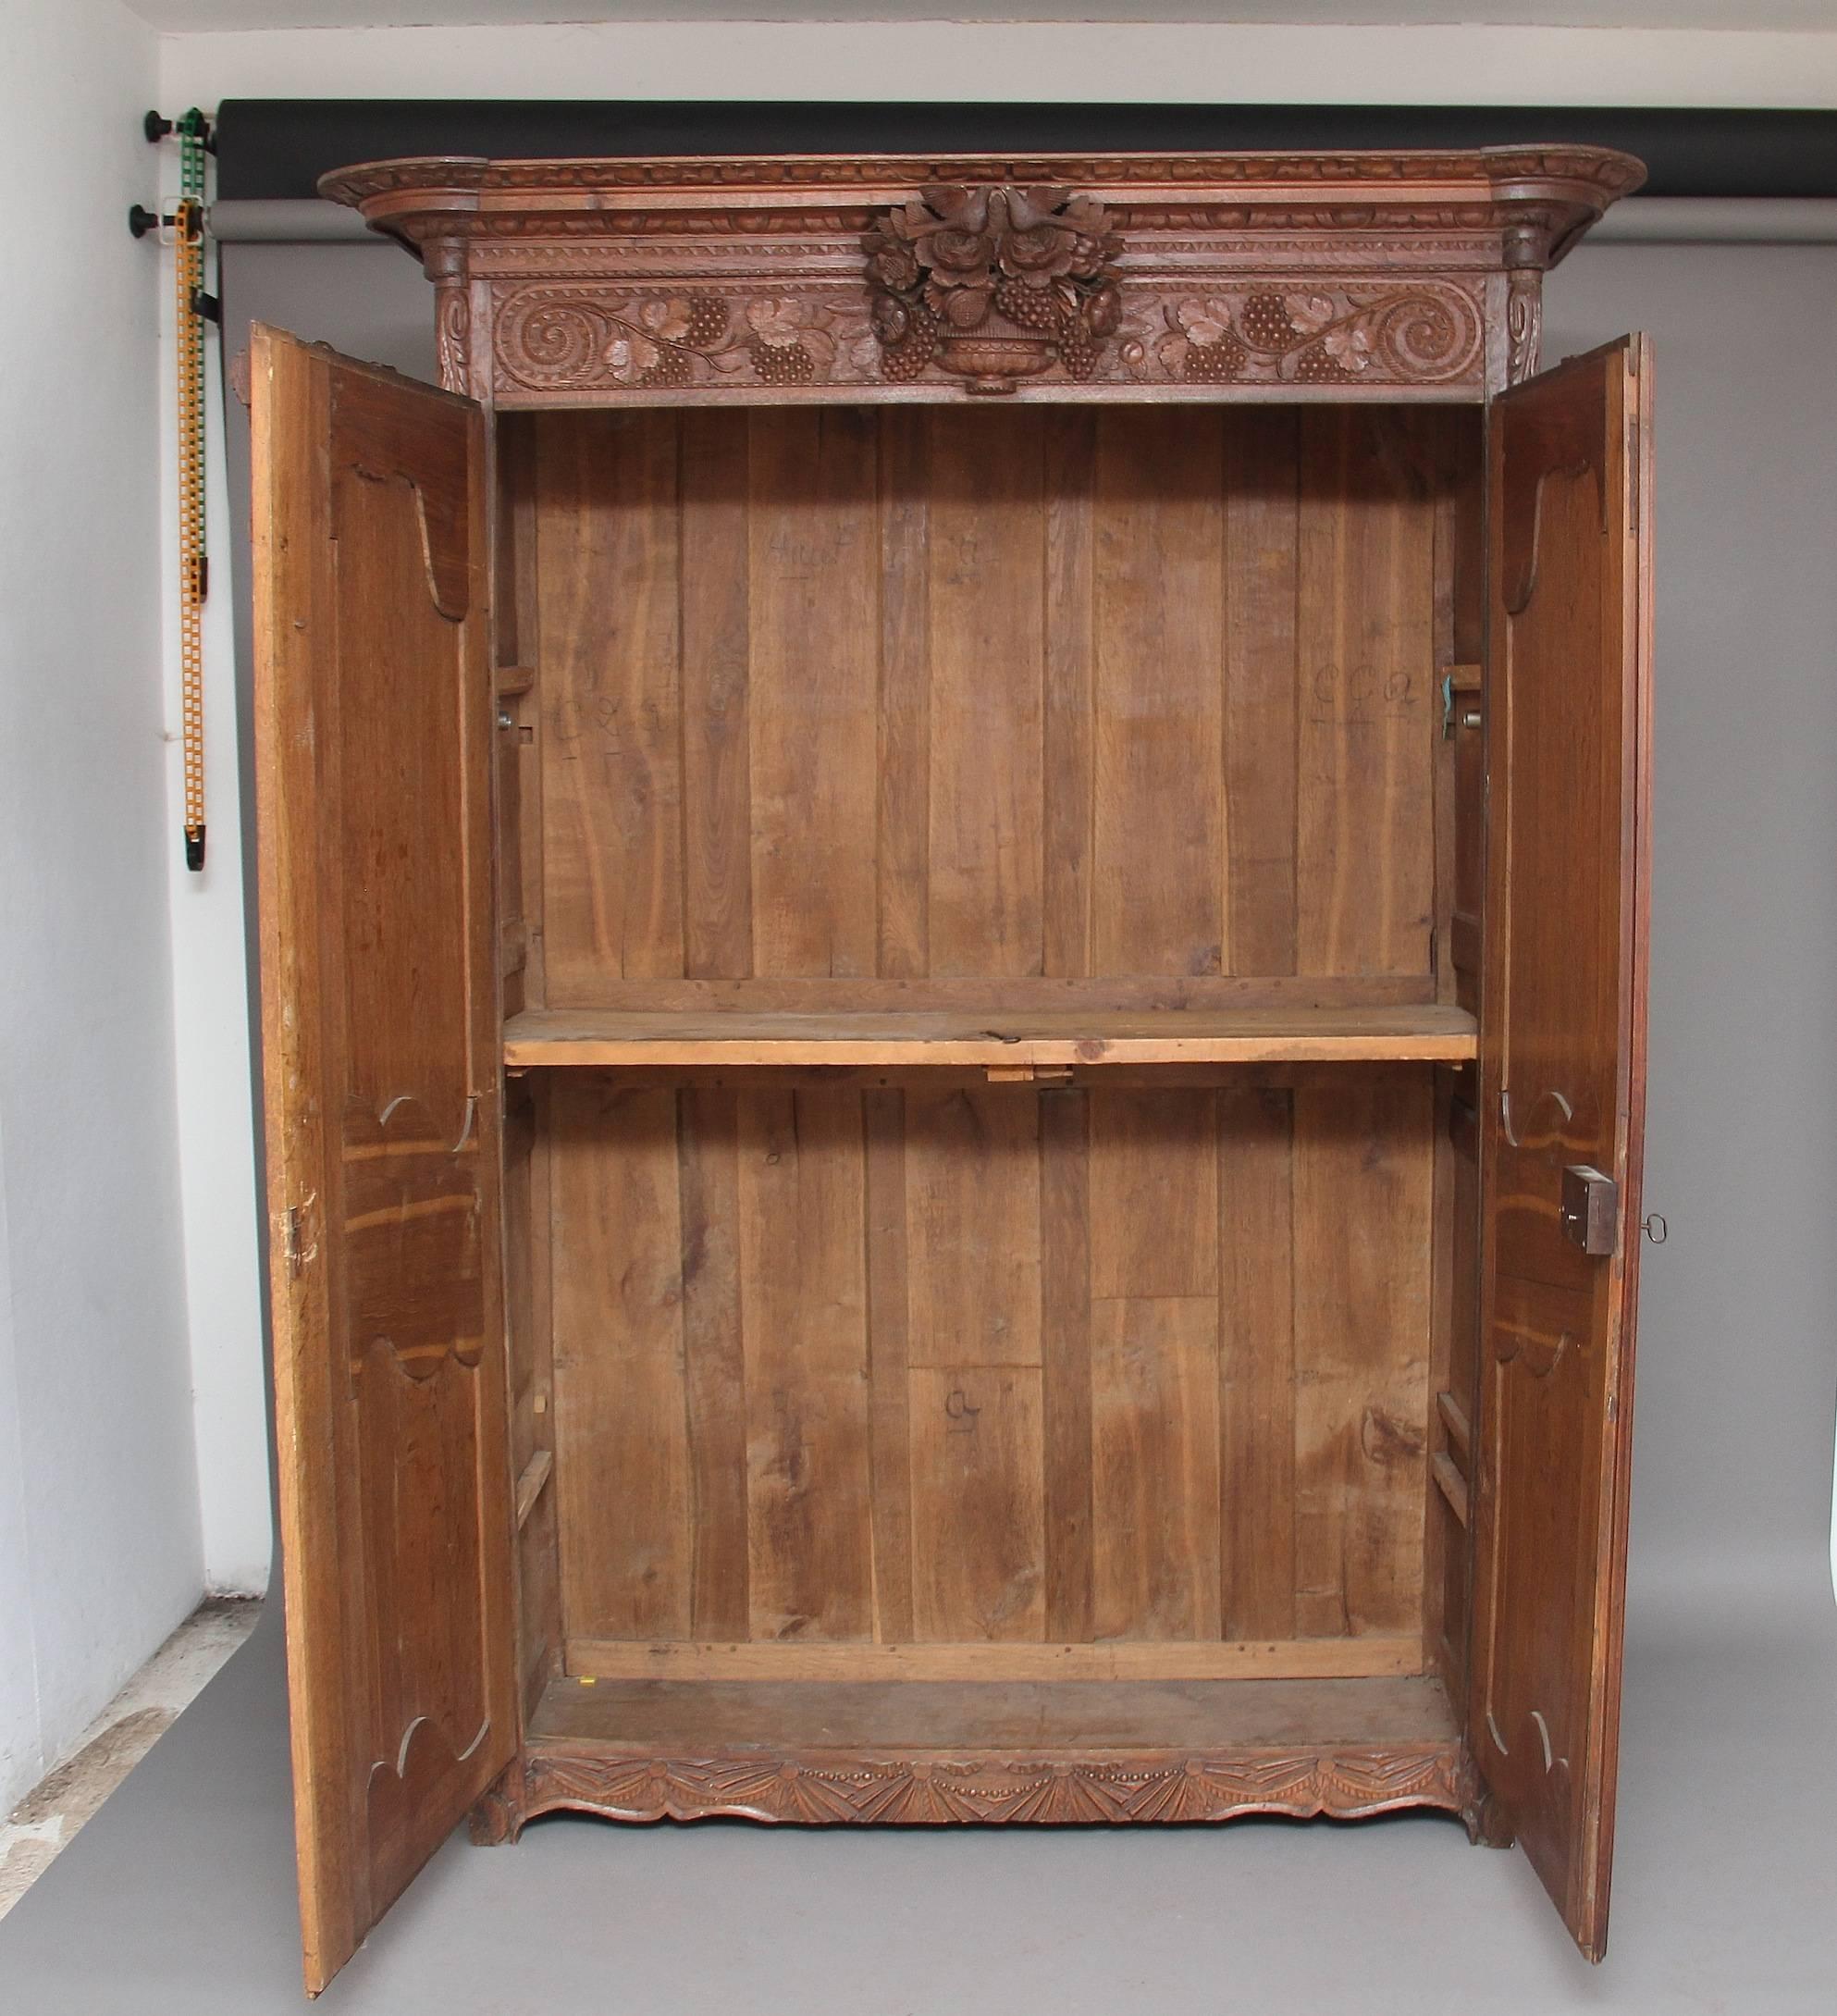 Early 19th century French oak marriage armoire from the Normandy region, the shaped and carved cornice with a frieze below with lovely crisp carvings of two love birds in the centre surrounded by grapes and foliage, the armoire having two doors each